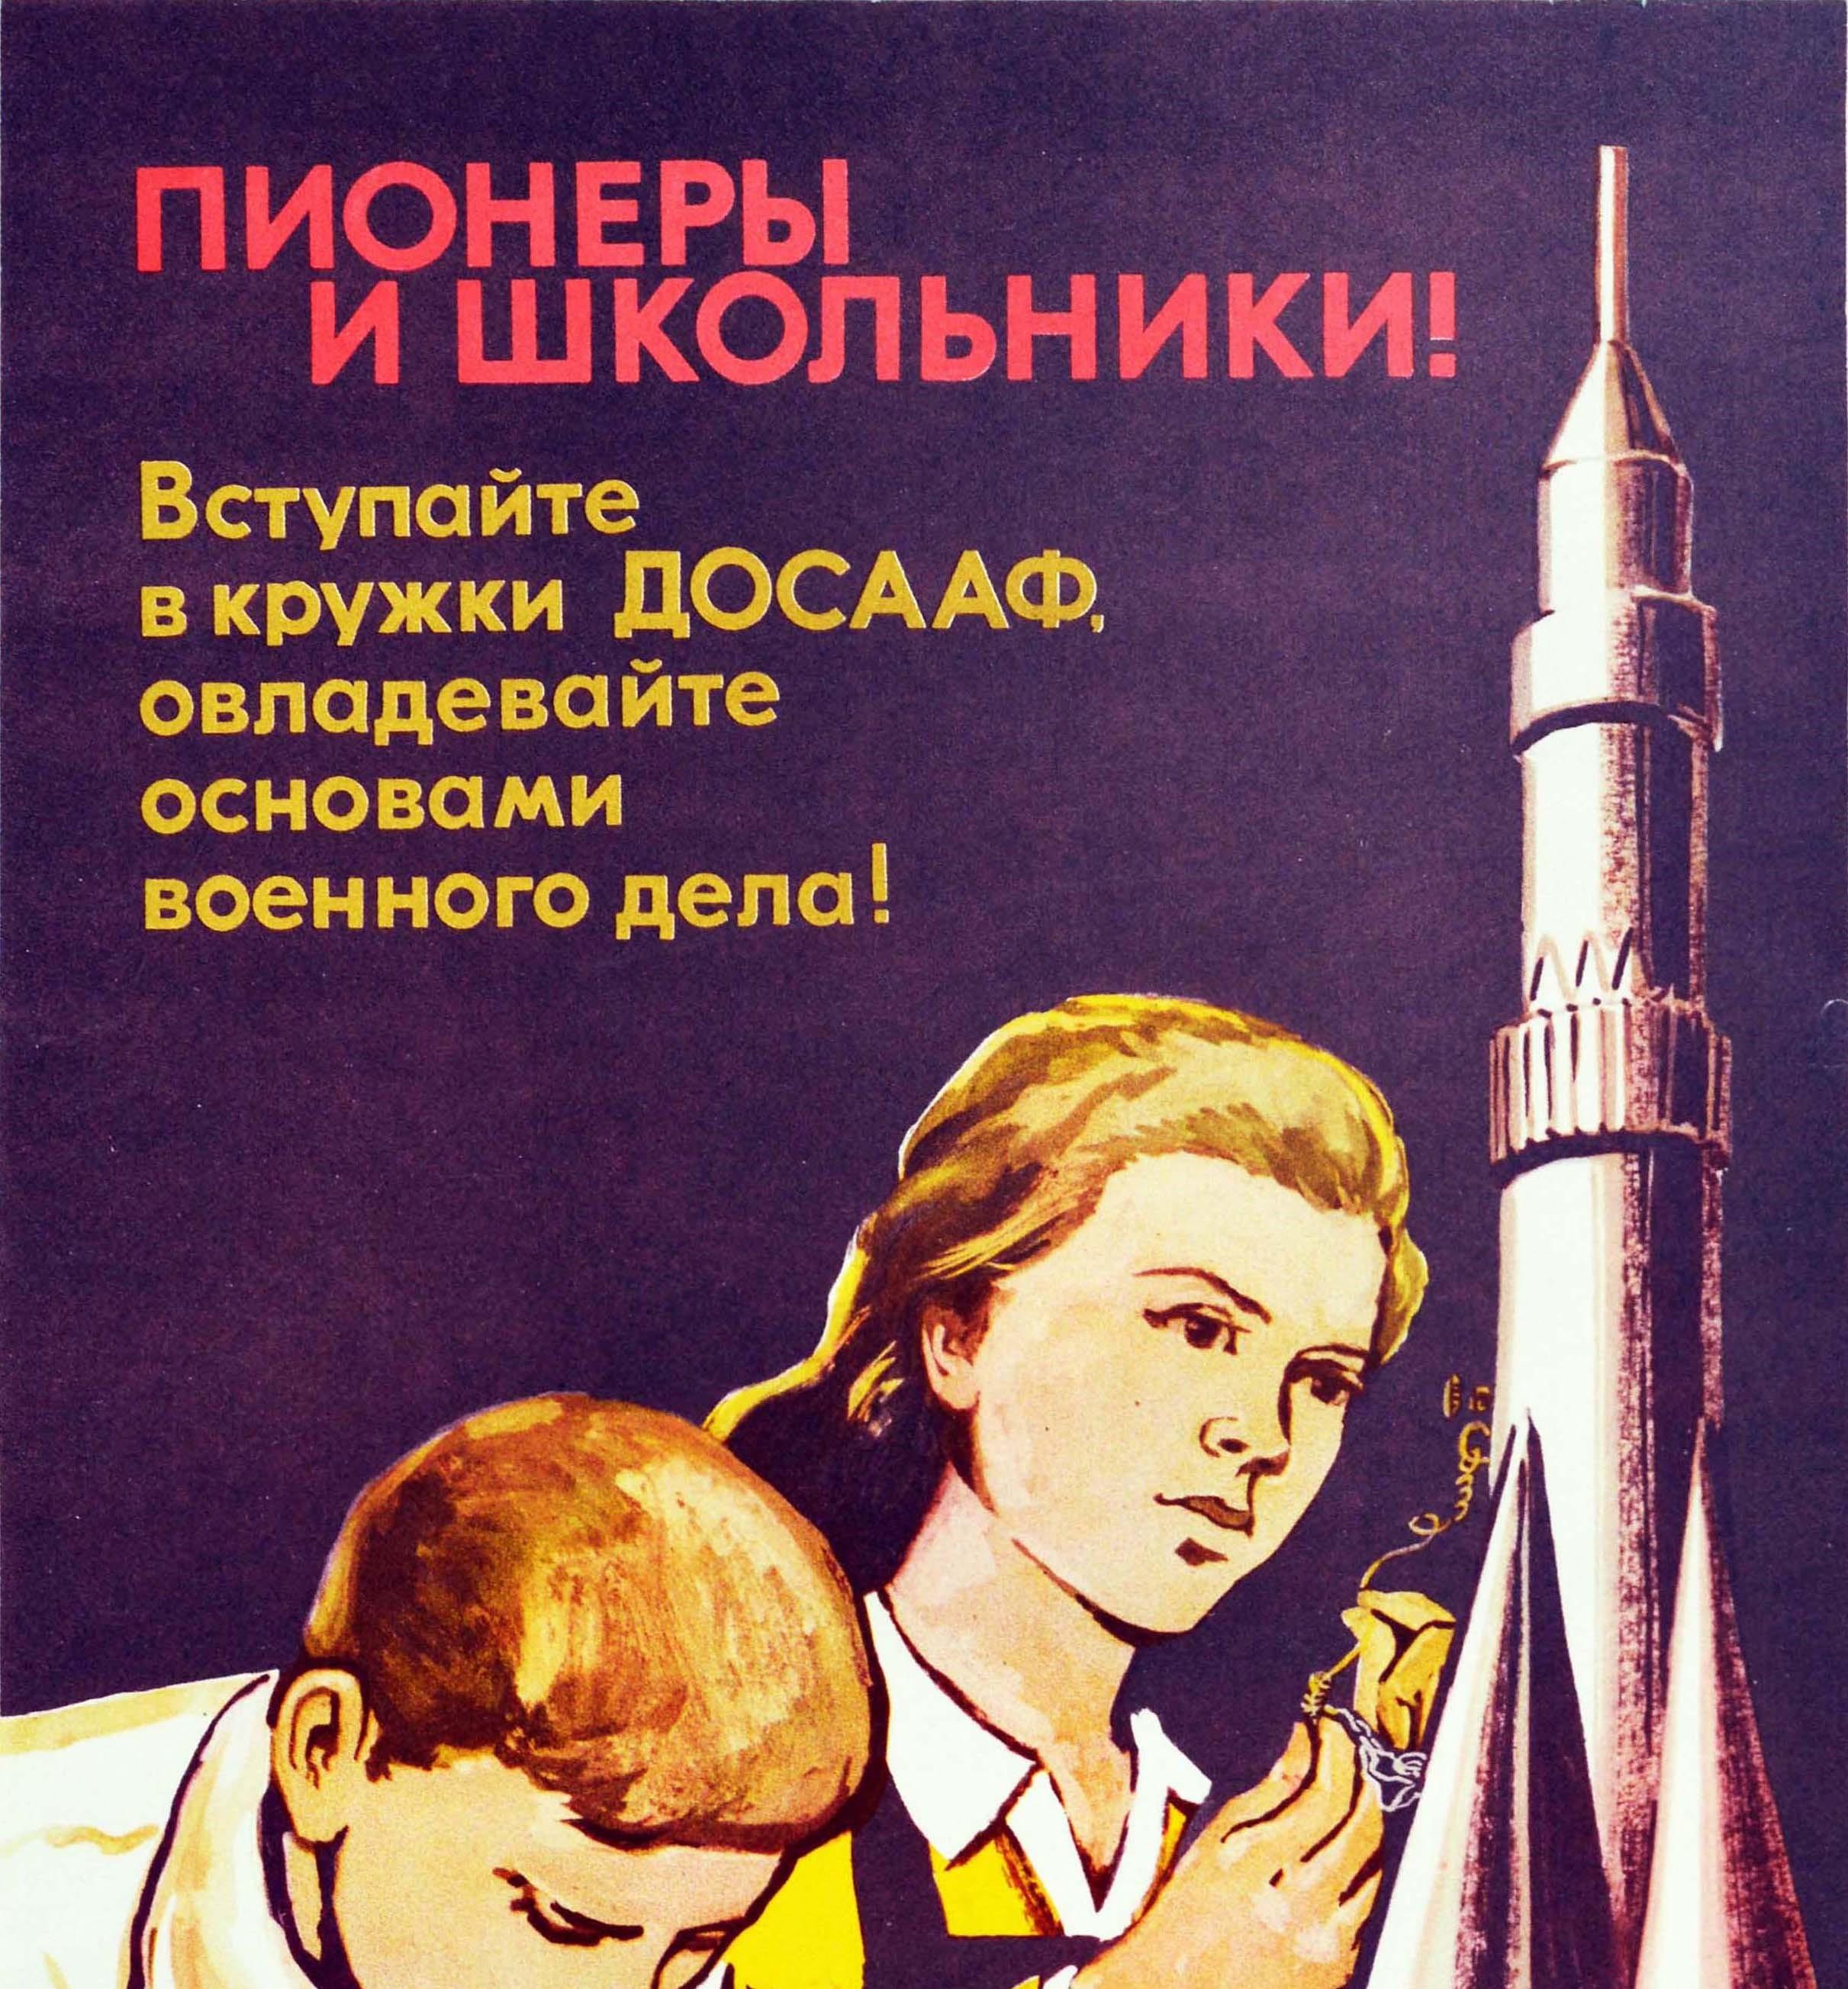 Original Vintage Poster Pioneer School Military Training Science Space Rocket - Print by A S Sysoev